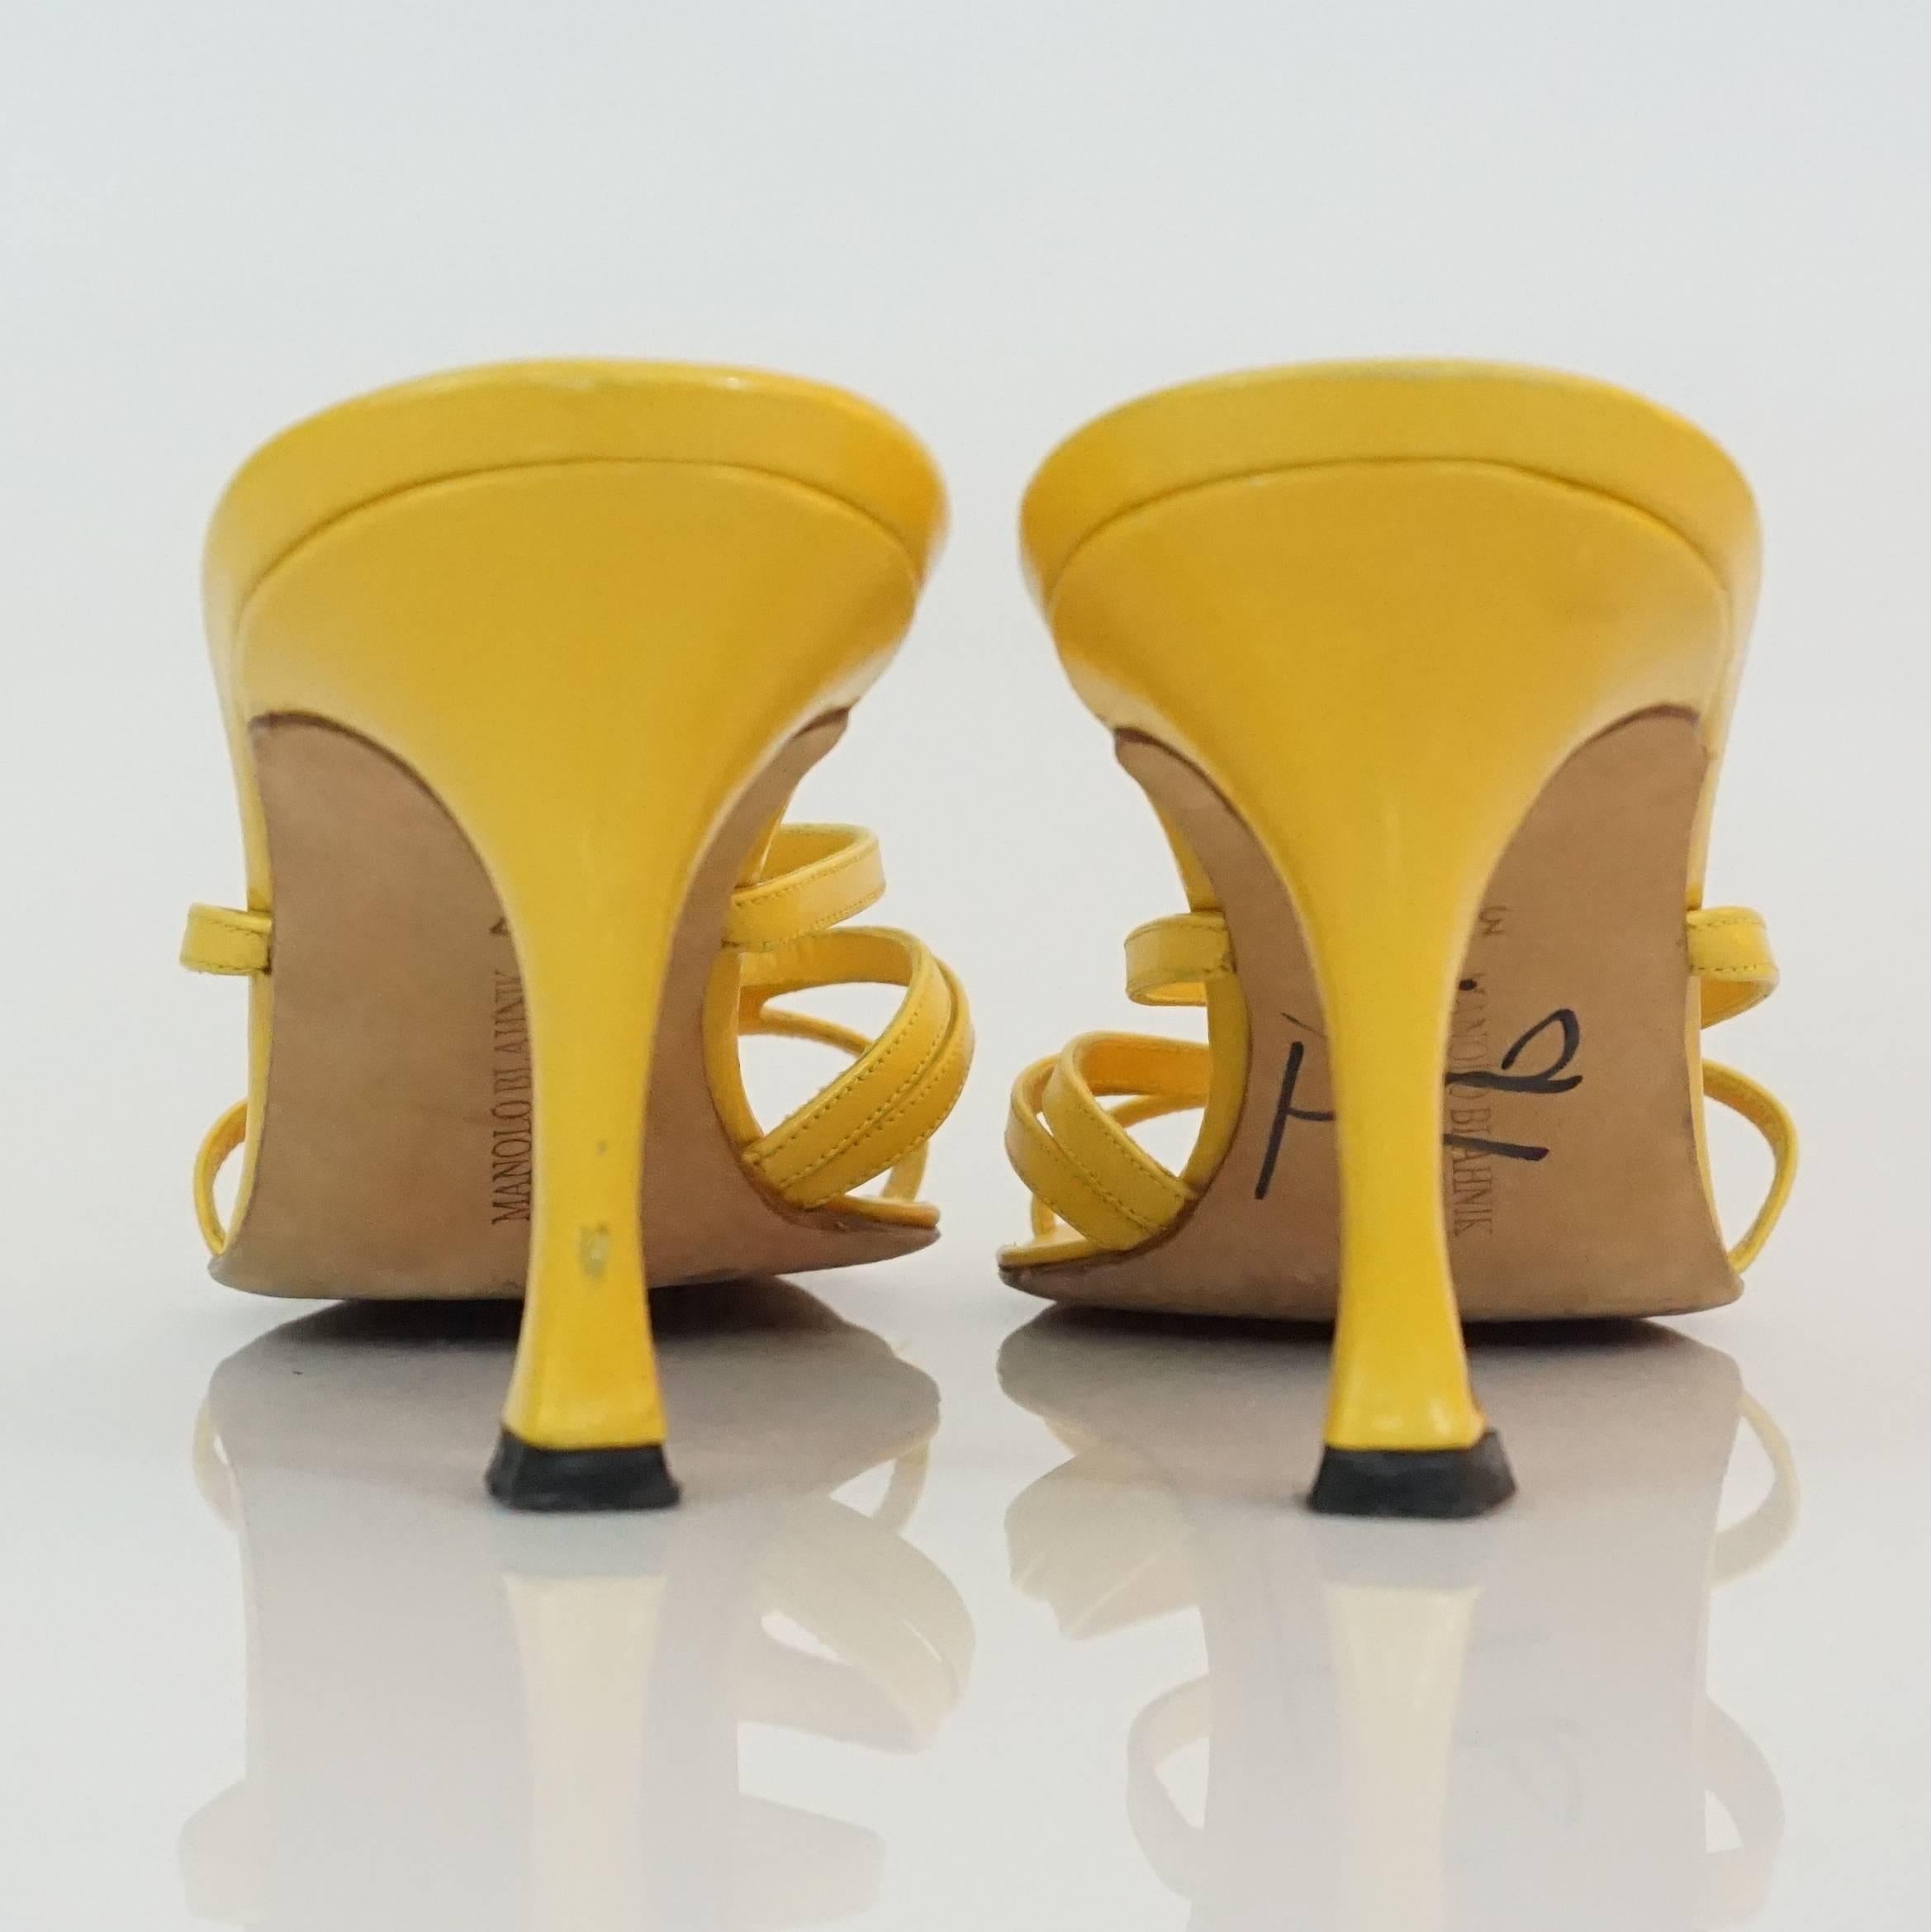 Manolo Blahnik Yellow Leather strappy sandal - 37 In Excellent Condition For Sale In West Palm Beach, FL